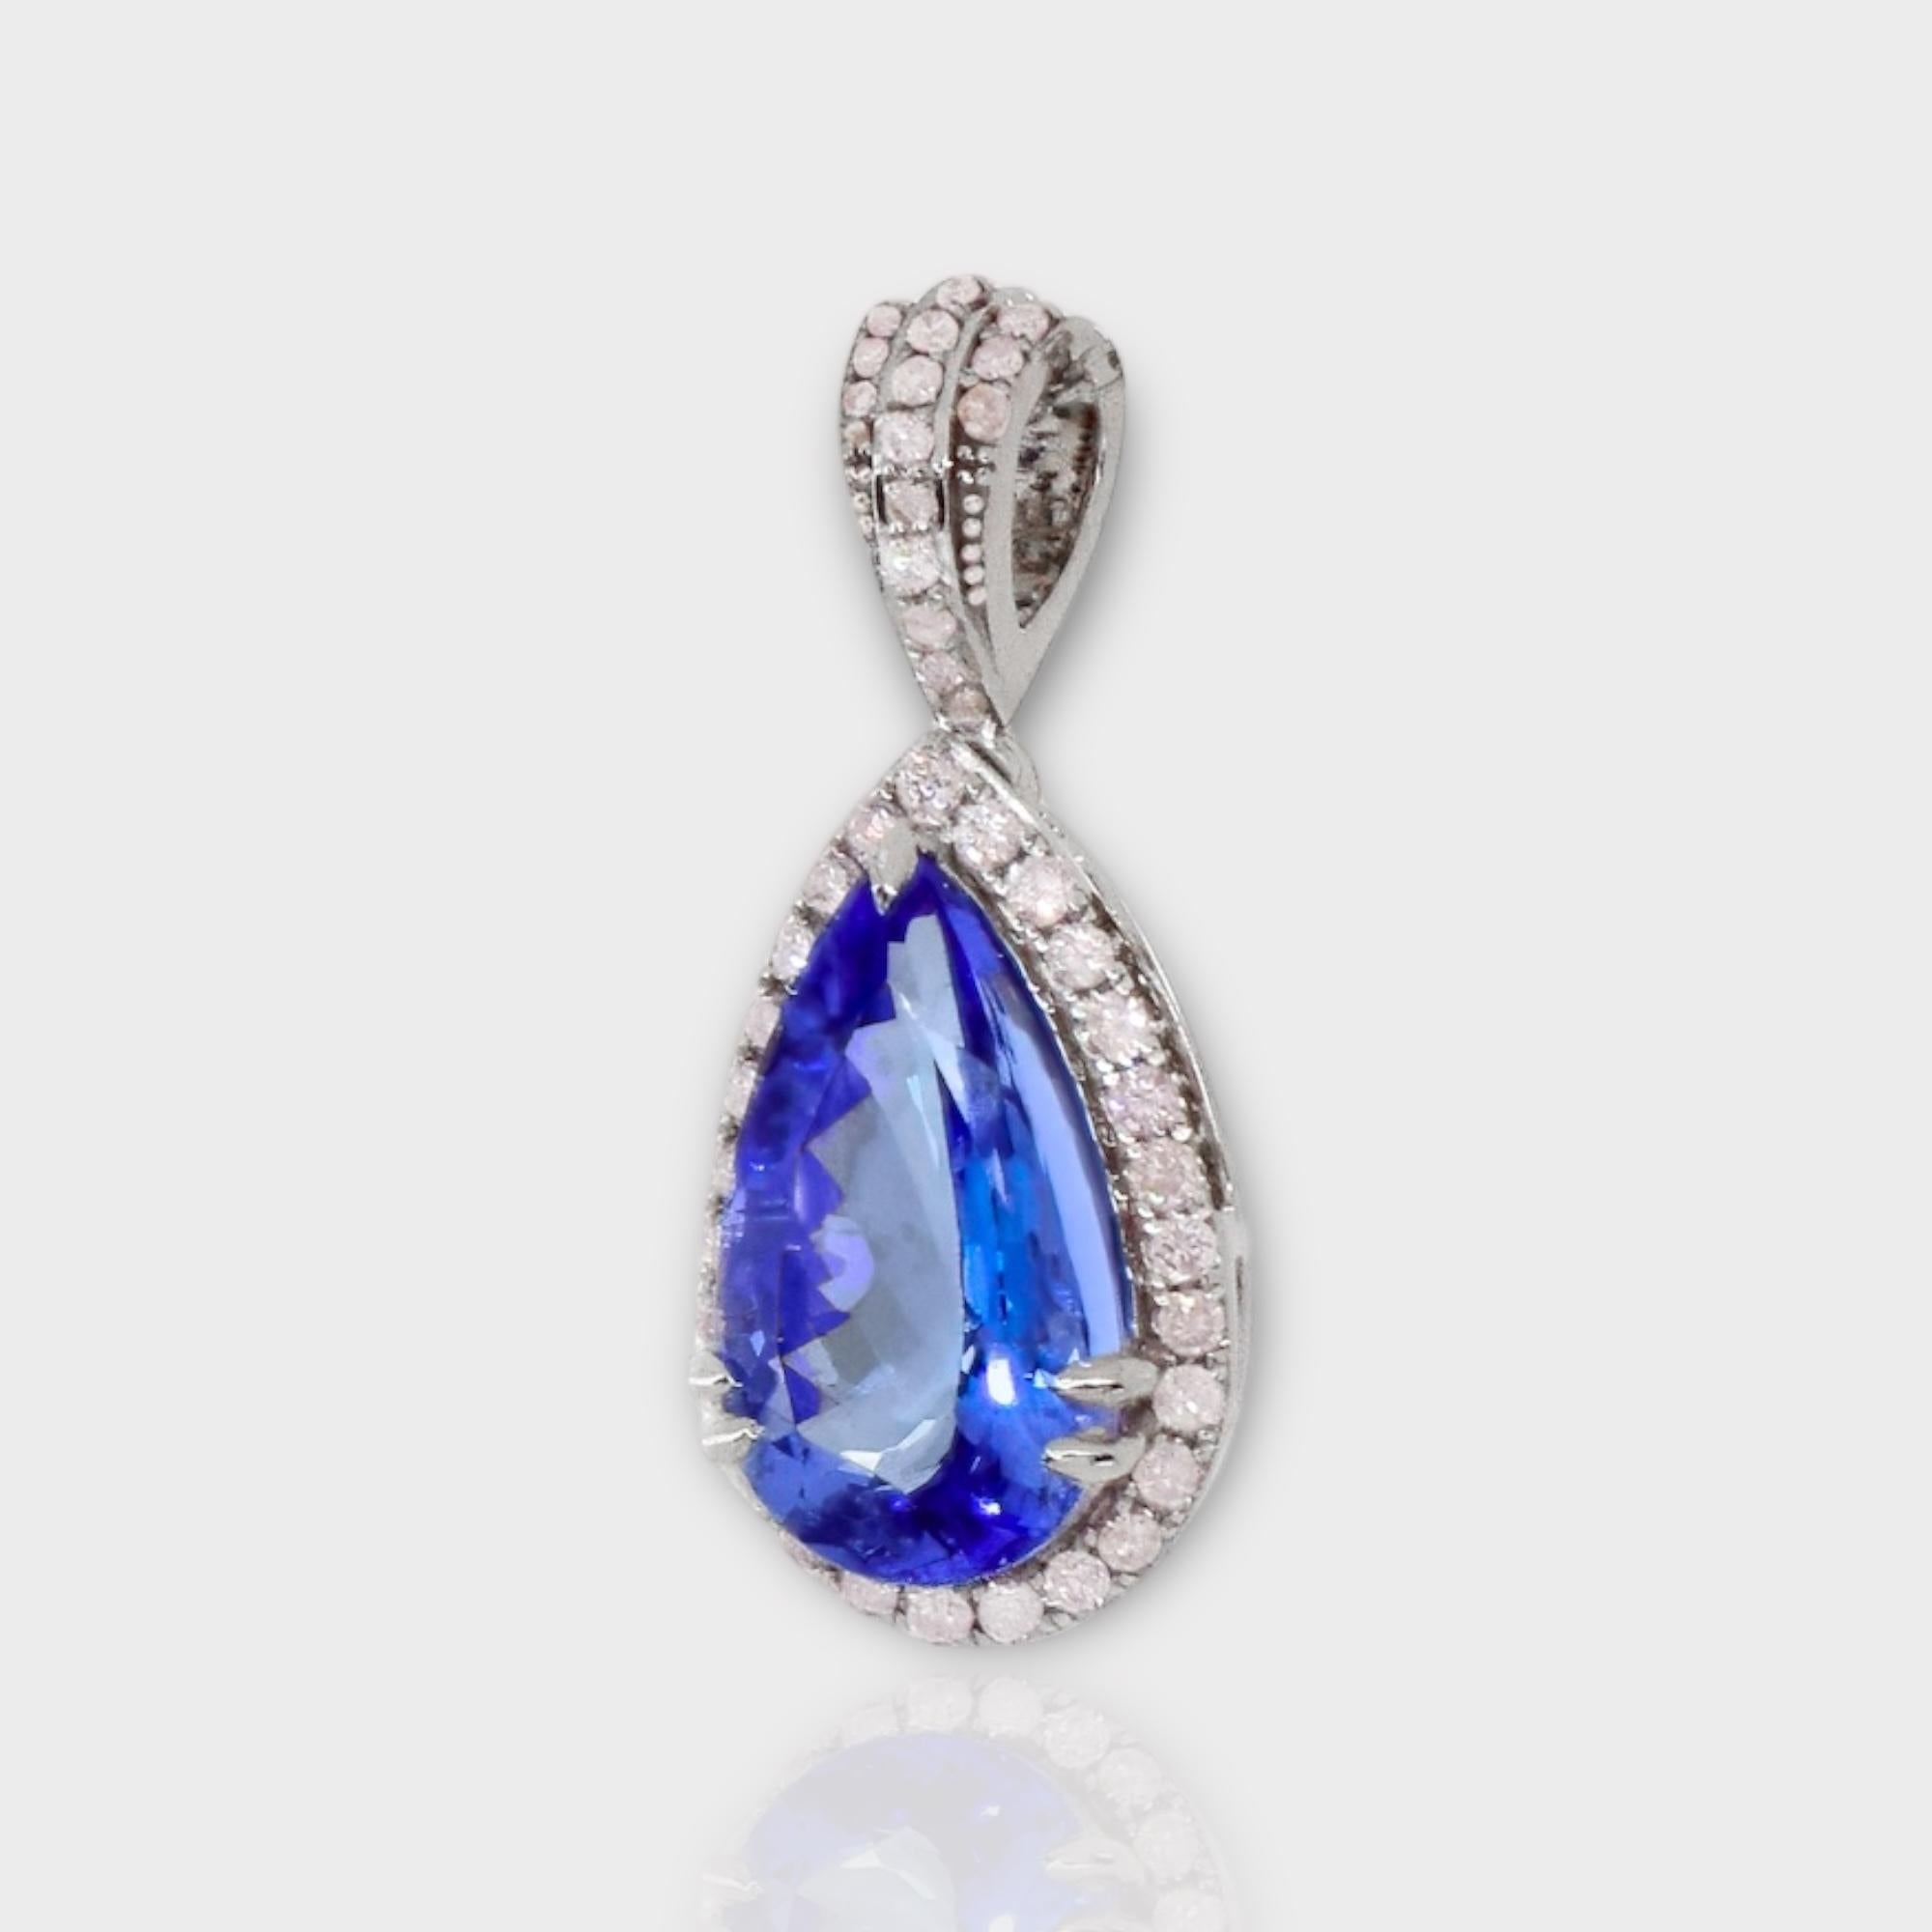 IGI 14K 2.86 ct Tanzanite&Pink Diamond Antique Pendant Necklace In New Condition For Sale In Kaohsiung City, TW